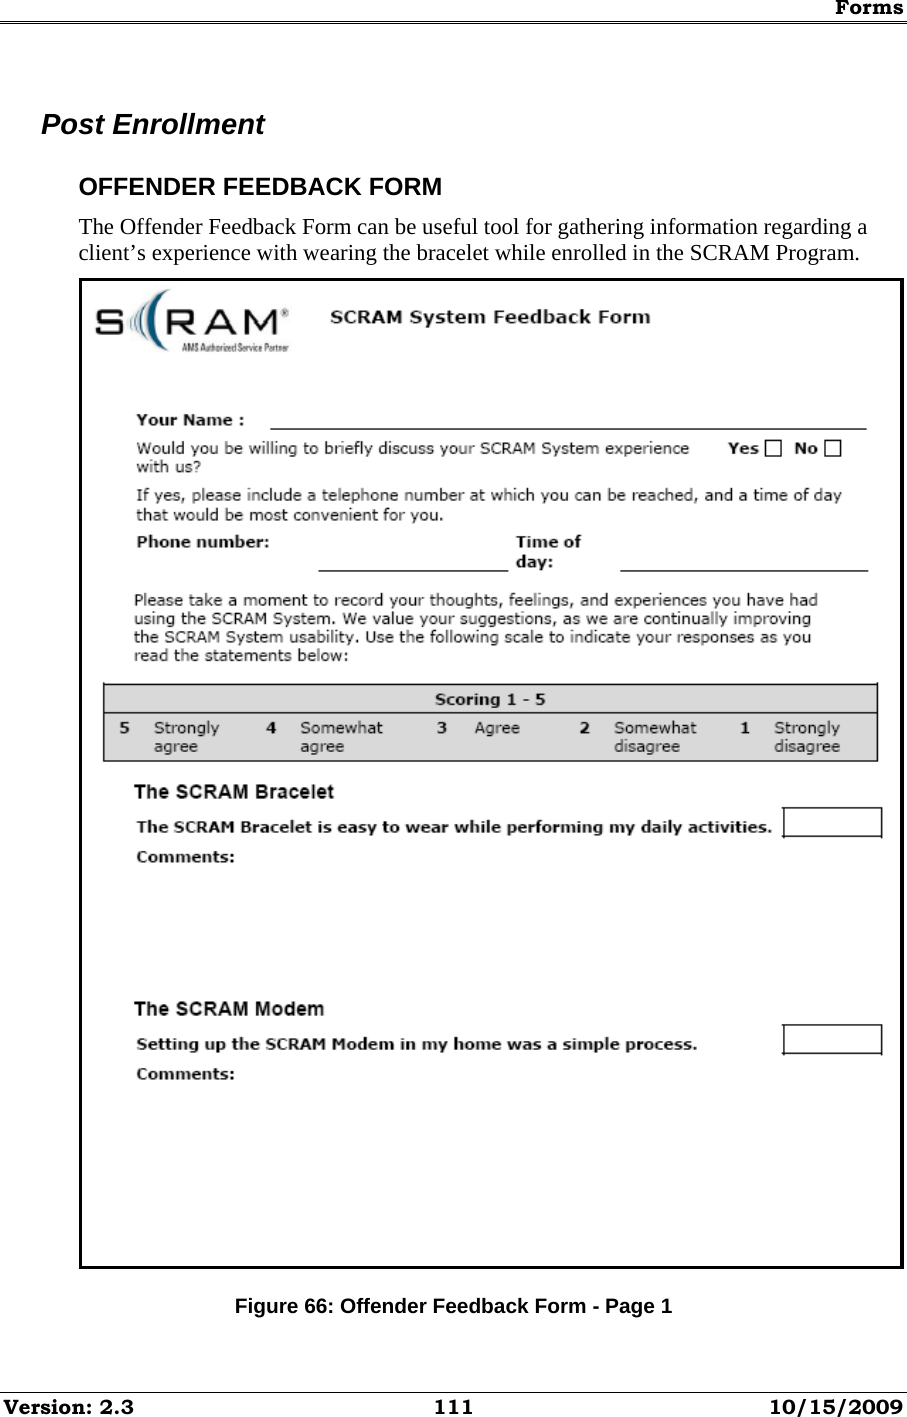 Forms Version: 2.3  111  10/15/2009 Post Enrollment OFFENDER FEEDBACK FORM The Offender Feedback Form can be useful tool for gathering information regarding a client’s experience with wearing the bracelet while enrolled in the SCRAM Program.  Figure 66: Offender Feedback Form - Page 1 